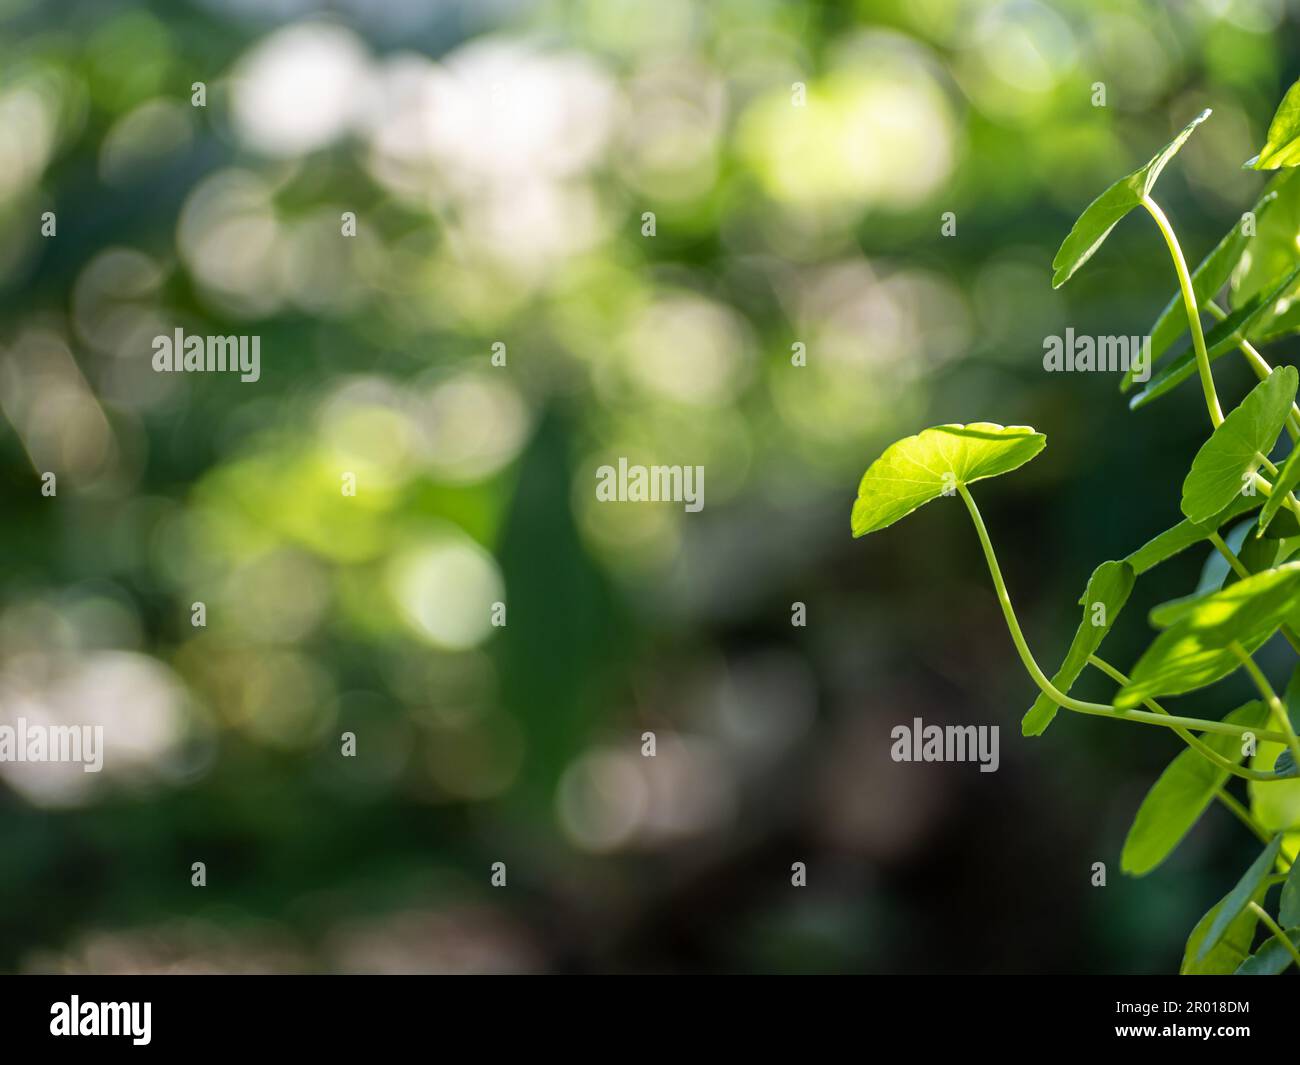 Full-frame leaves of Hydrocotyle umbellate as nature background Stock Photo